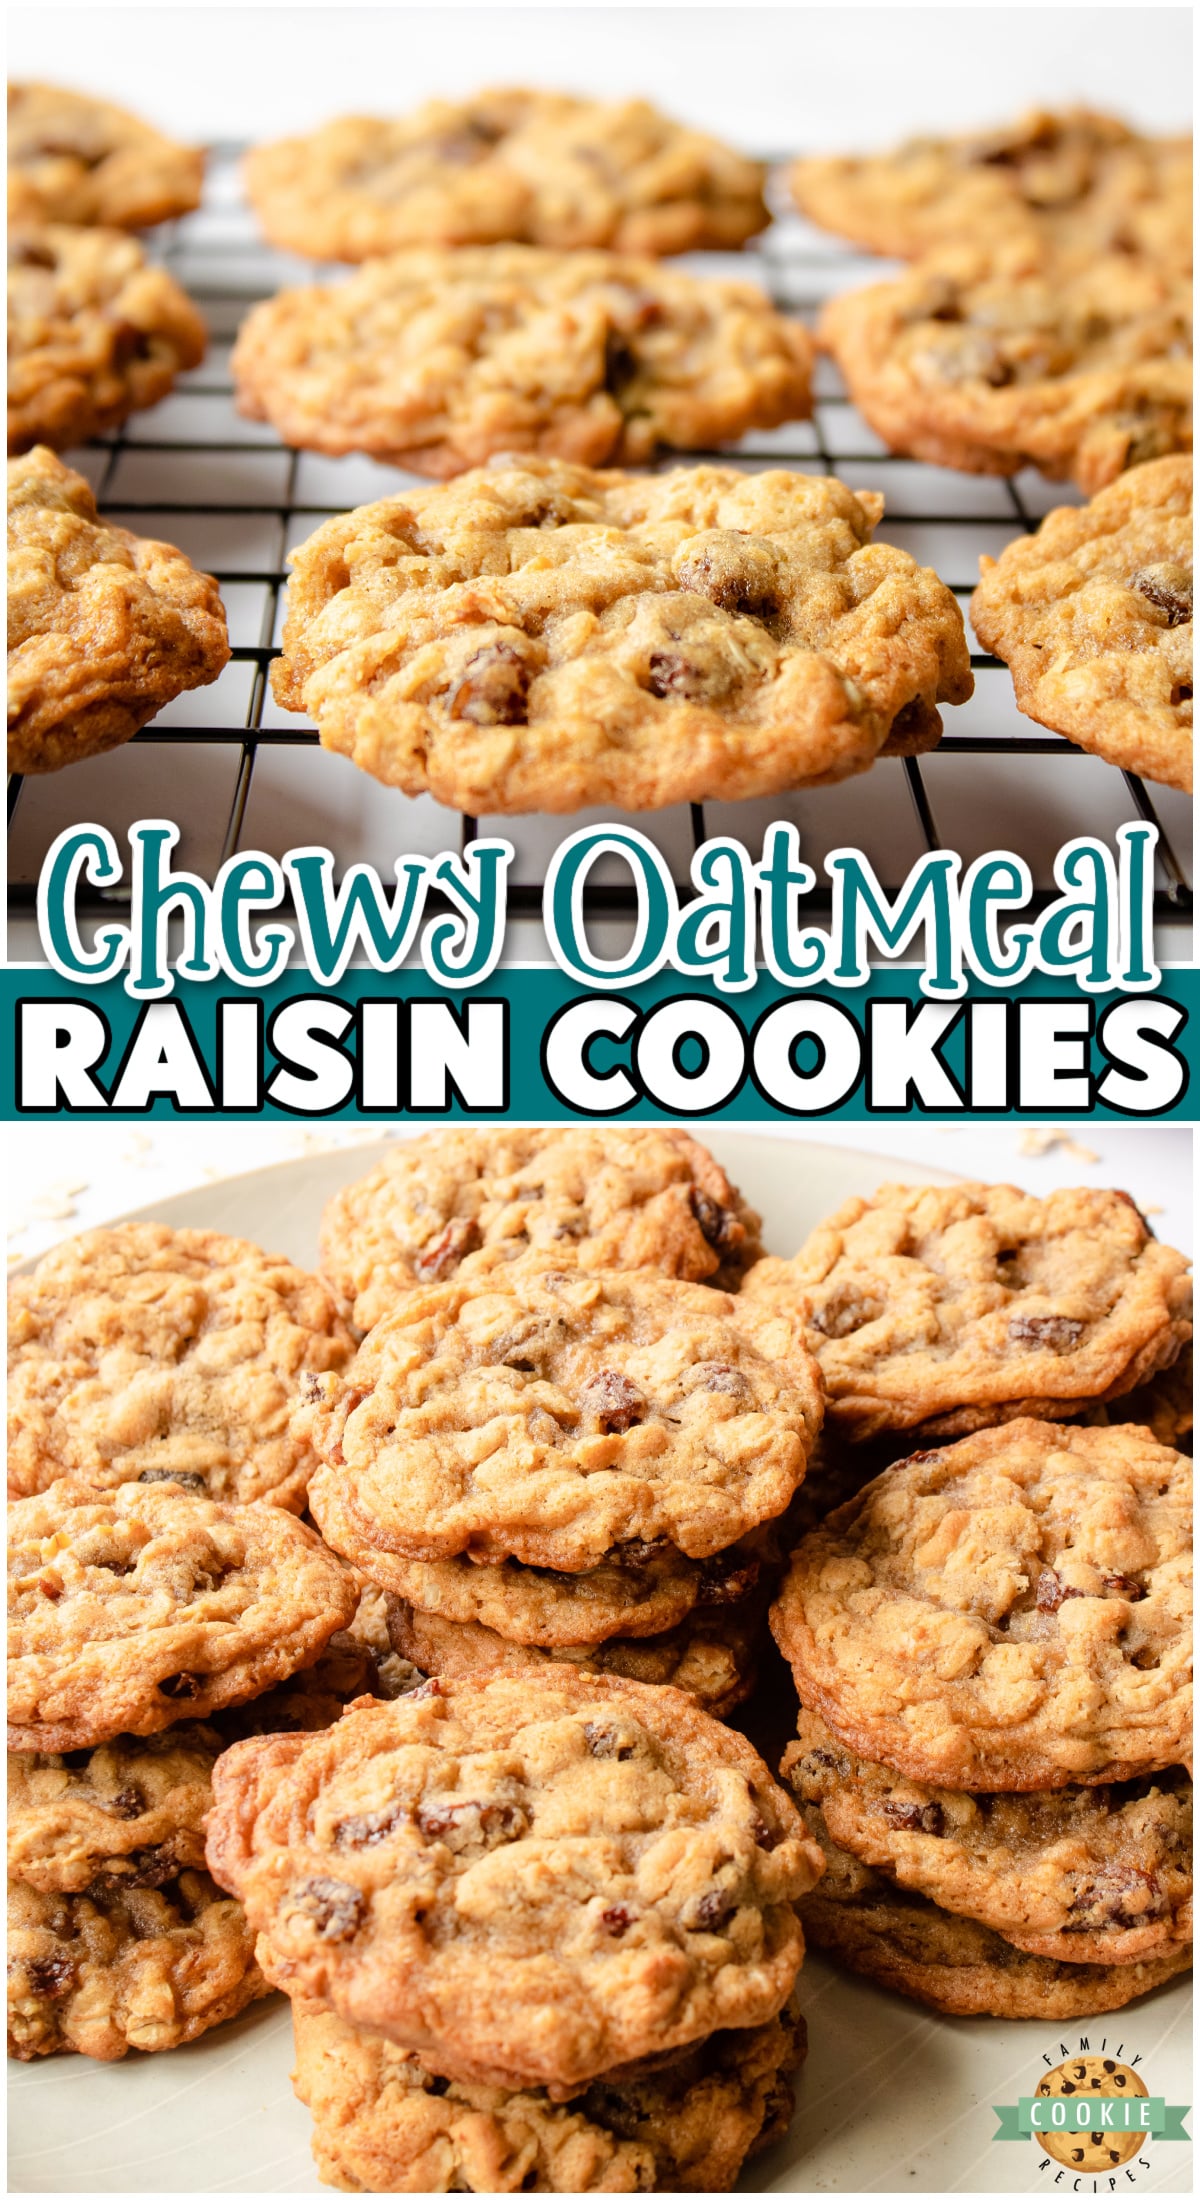 Chewy Oatmeal Raisin Cookies made with classic ingredients for a buttery cookie spiced with cinnamon and dotted with plump raisins! 